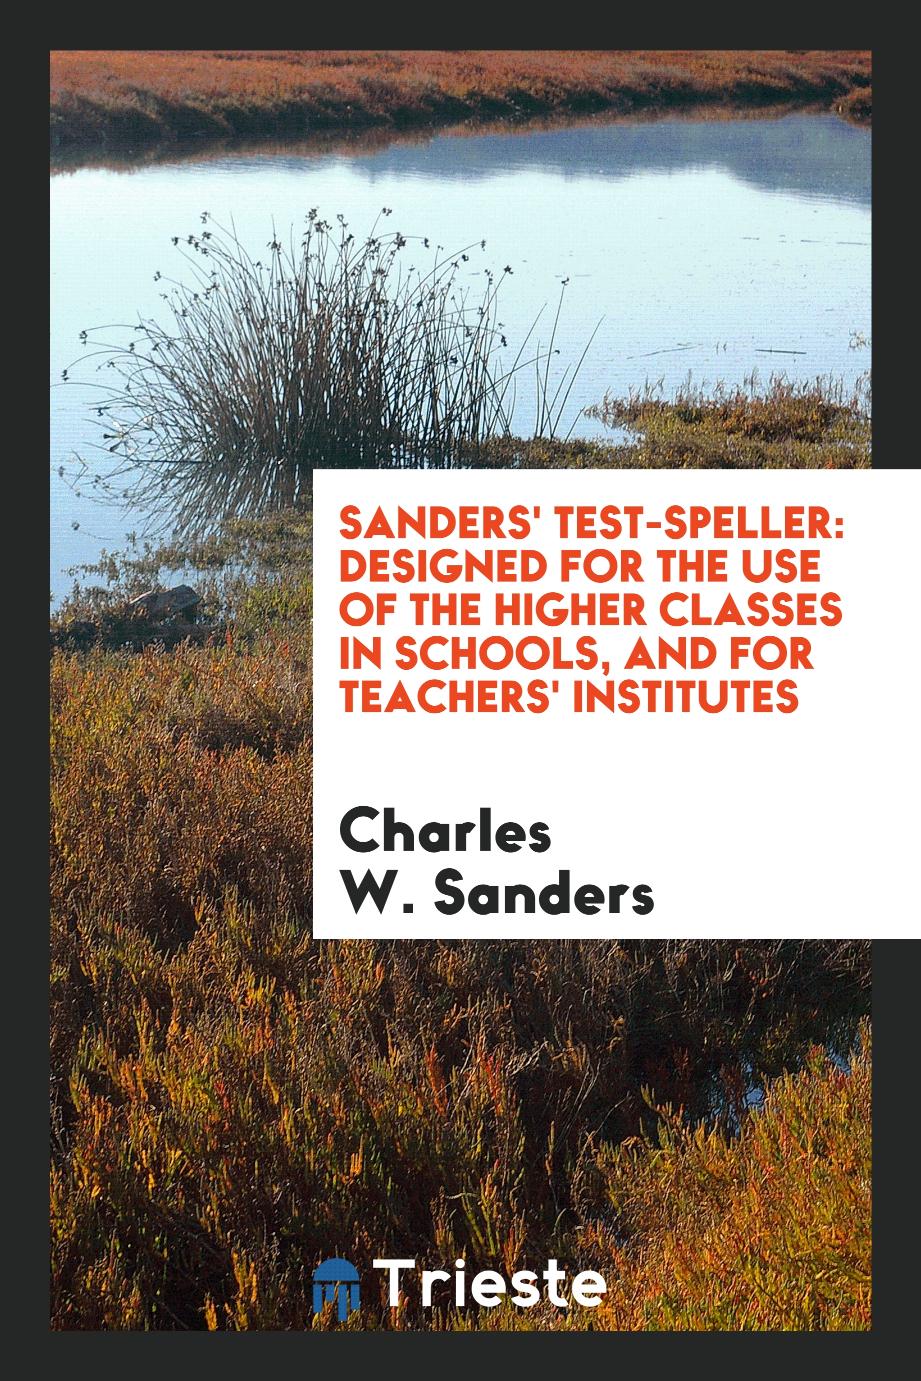 Sanders' Test-Speller: Designed for the Use of the Higher Classes in Schools, and for Teachers' Institutes